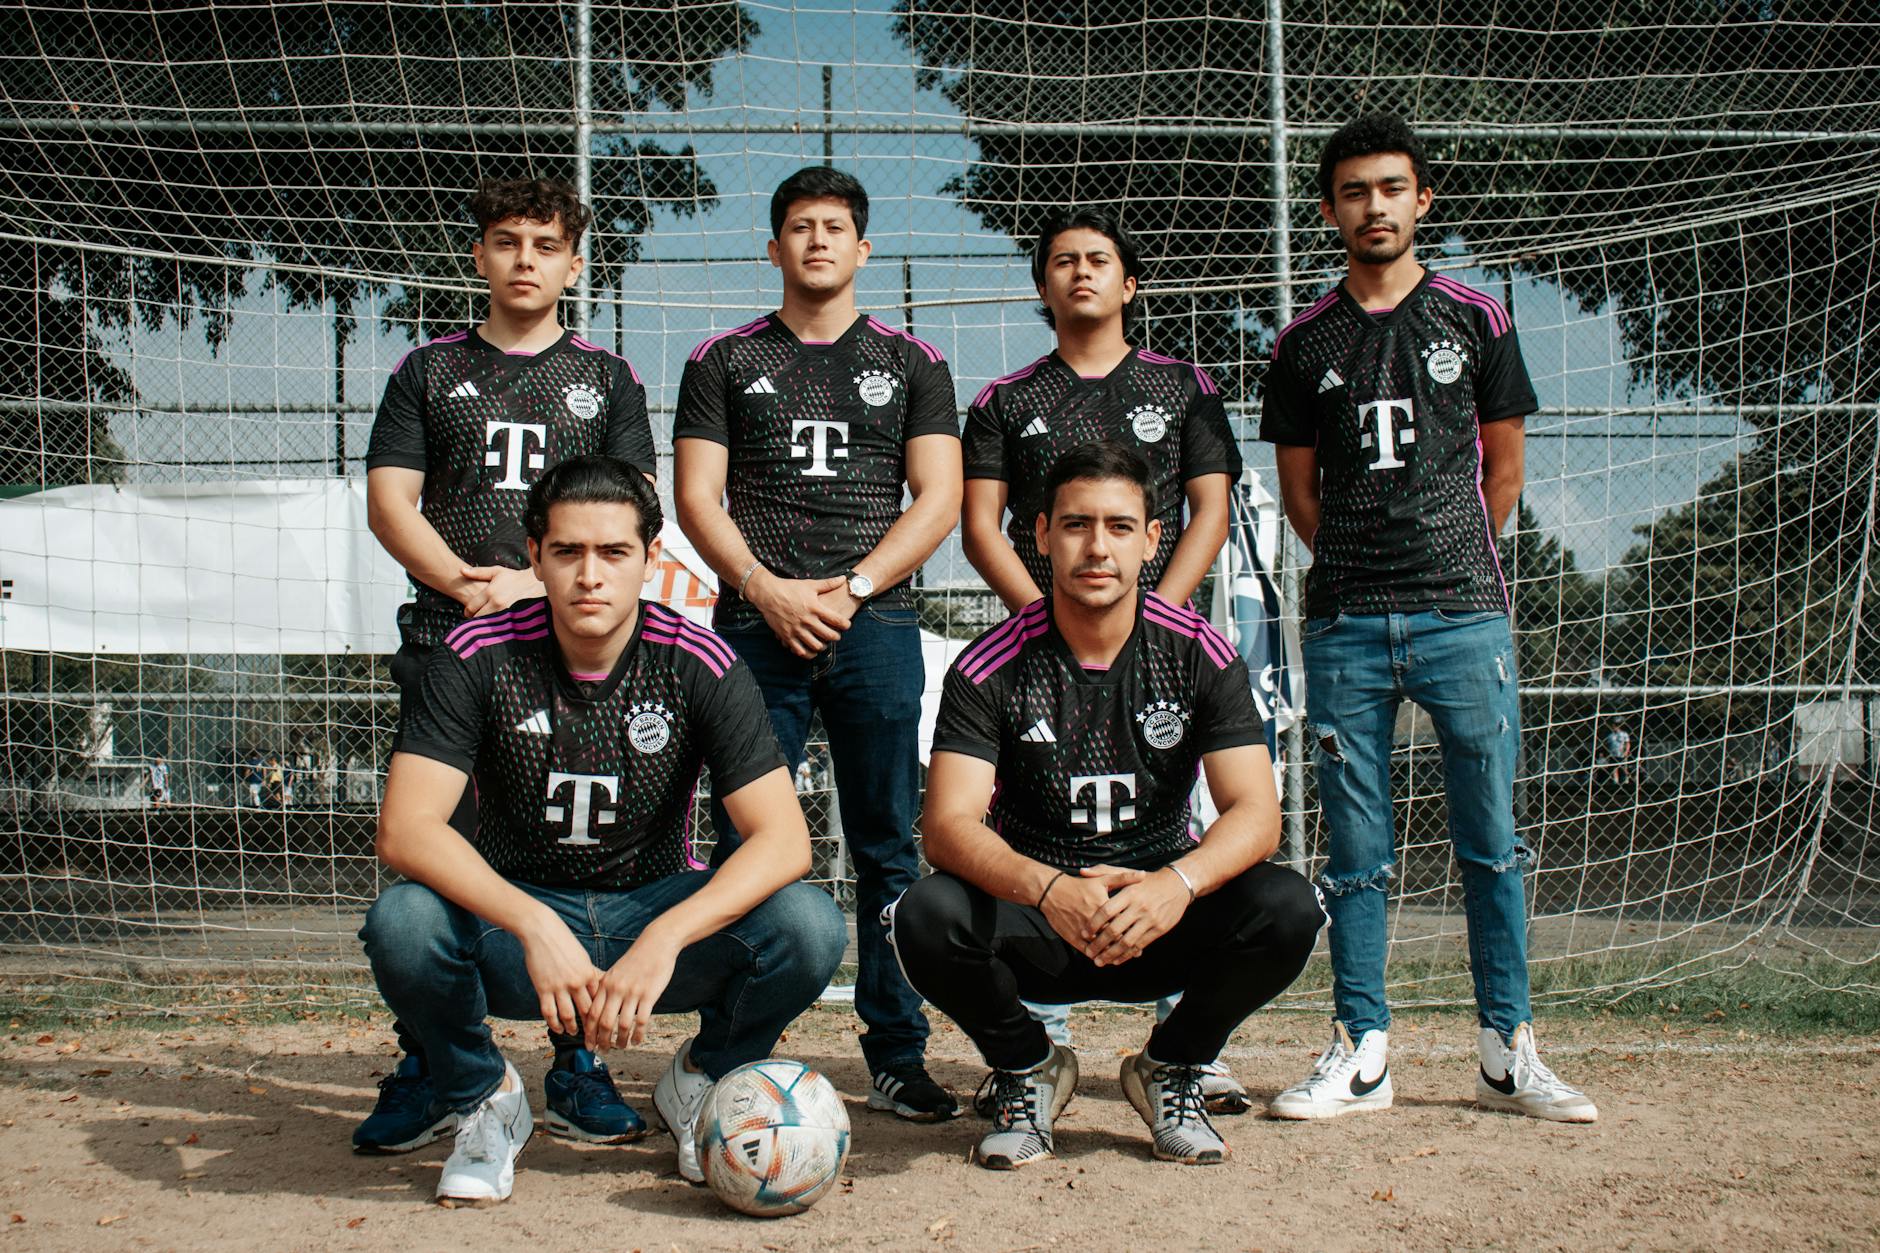 A group of men posing for a photo in front of a soccer net